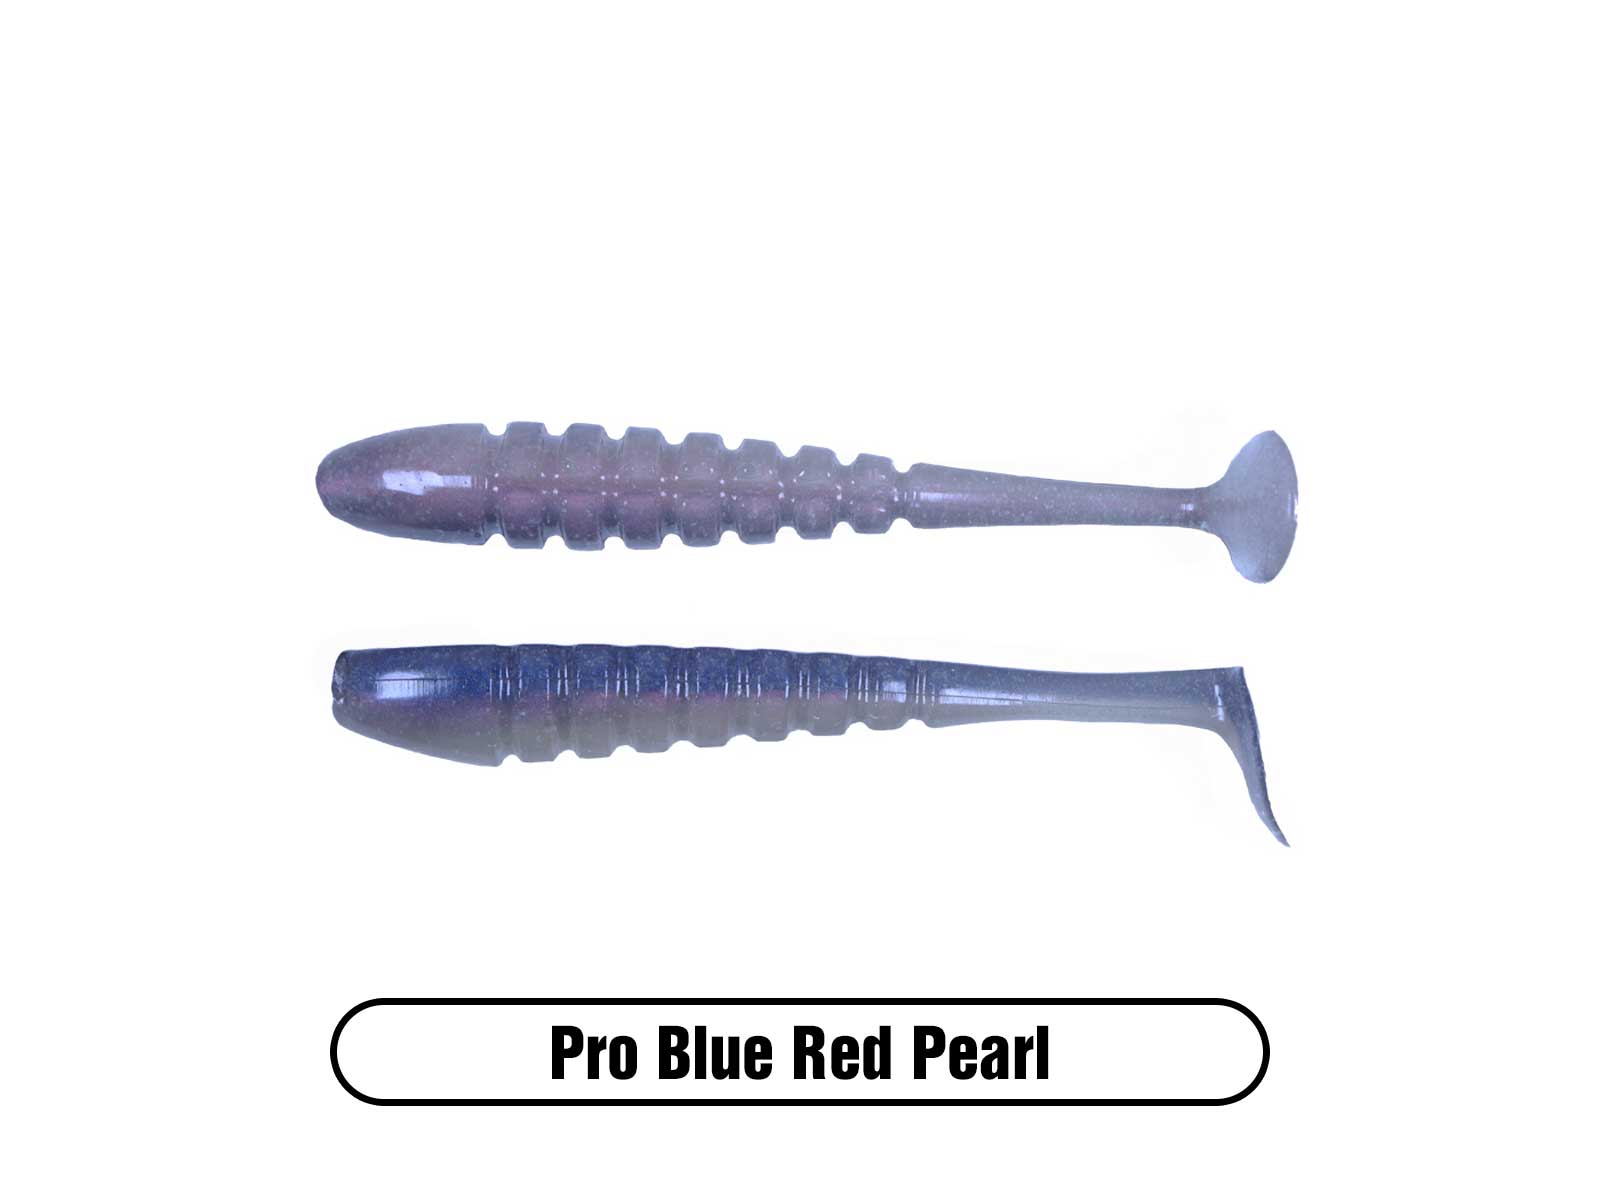 4.75" Swammer Swimbait Pro Blue Red Pearl